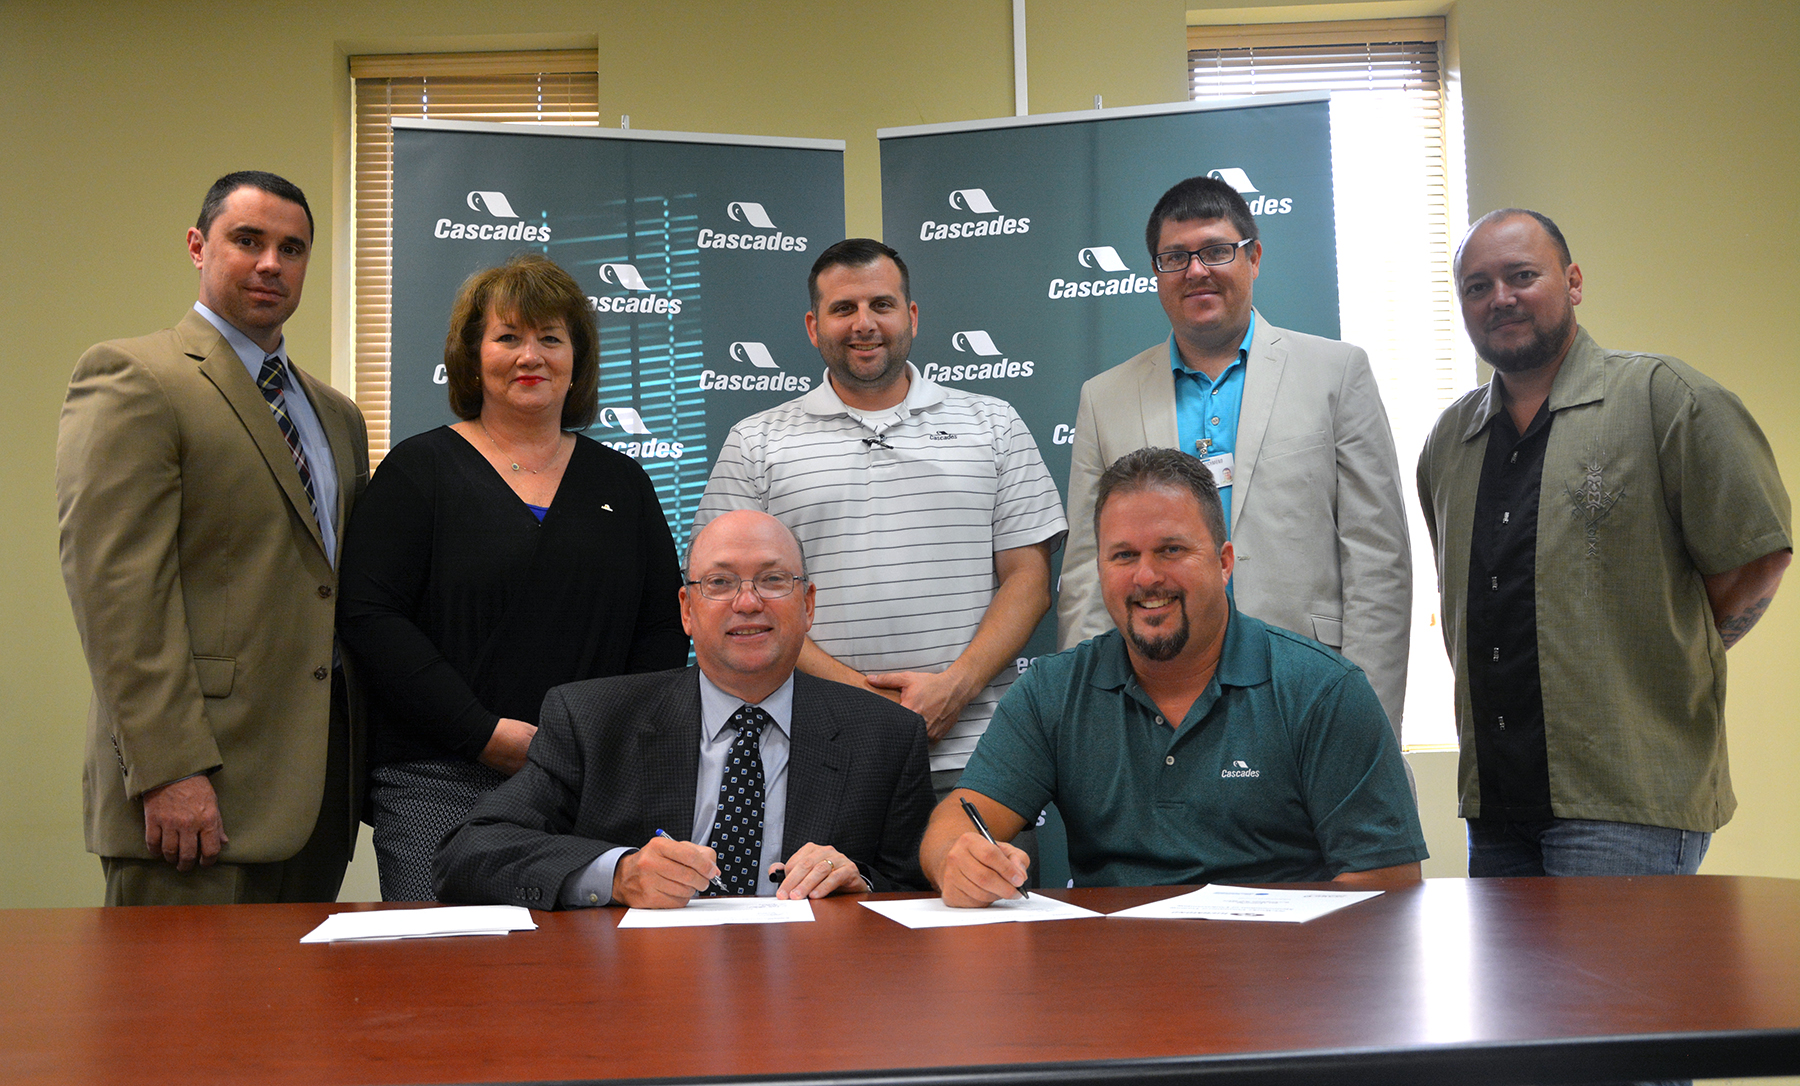 Seated left, Dr. Dale McInnis, president of Richmond Community College, signs a contract alongside Cascades Tissue Rockingham Mill Manager Mickey Lee, securing state-funded customized training for the company's employees through RichmondCC. Also pictured, standing in back, from left, are Dr. Robbie Taylor, vice president of Workforce and Economic Development at RichmondCC; Cascades Human Resource Manager Debbie Currie; Cascades Production Manager Mario Infante; RichmondCC Director of Customized Training Lee Eller; and Cascades Maintenance Manager Jake Elder. 